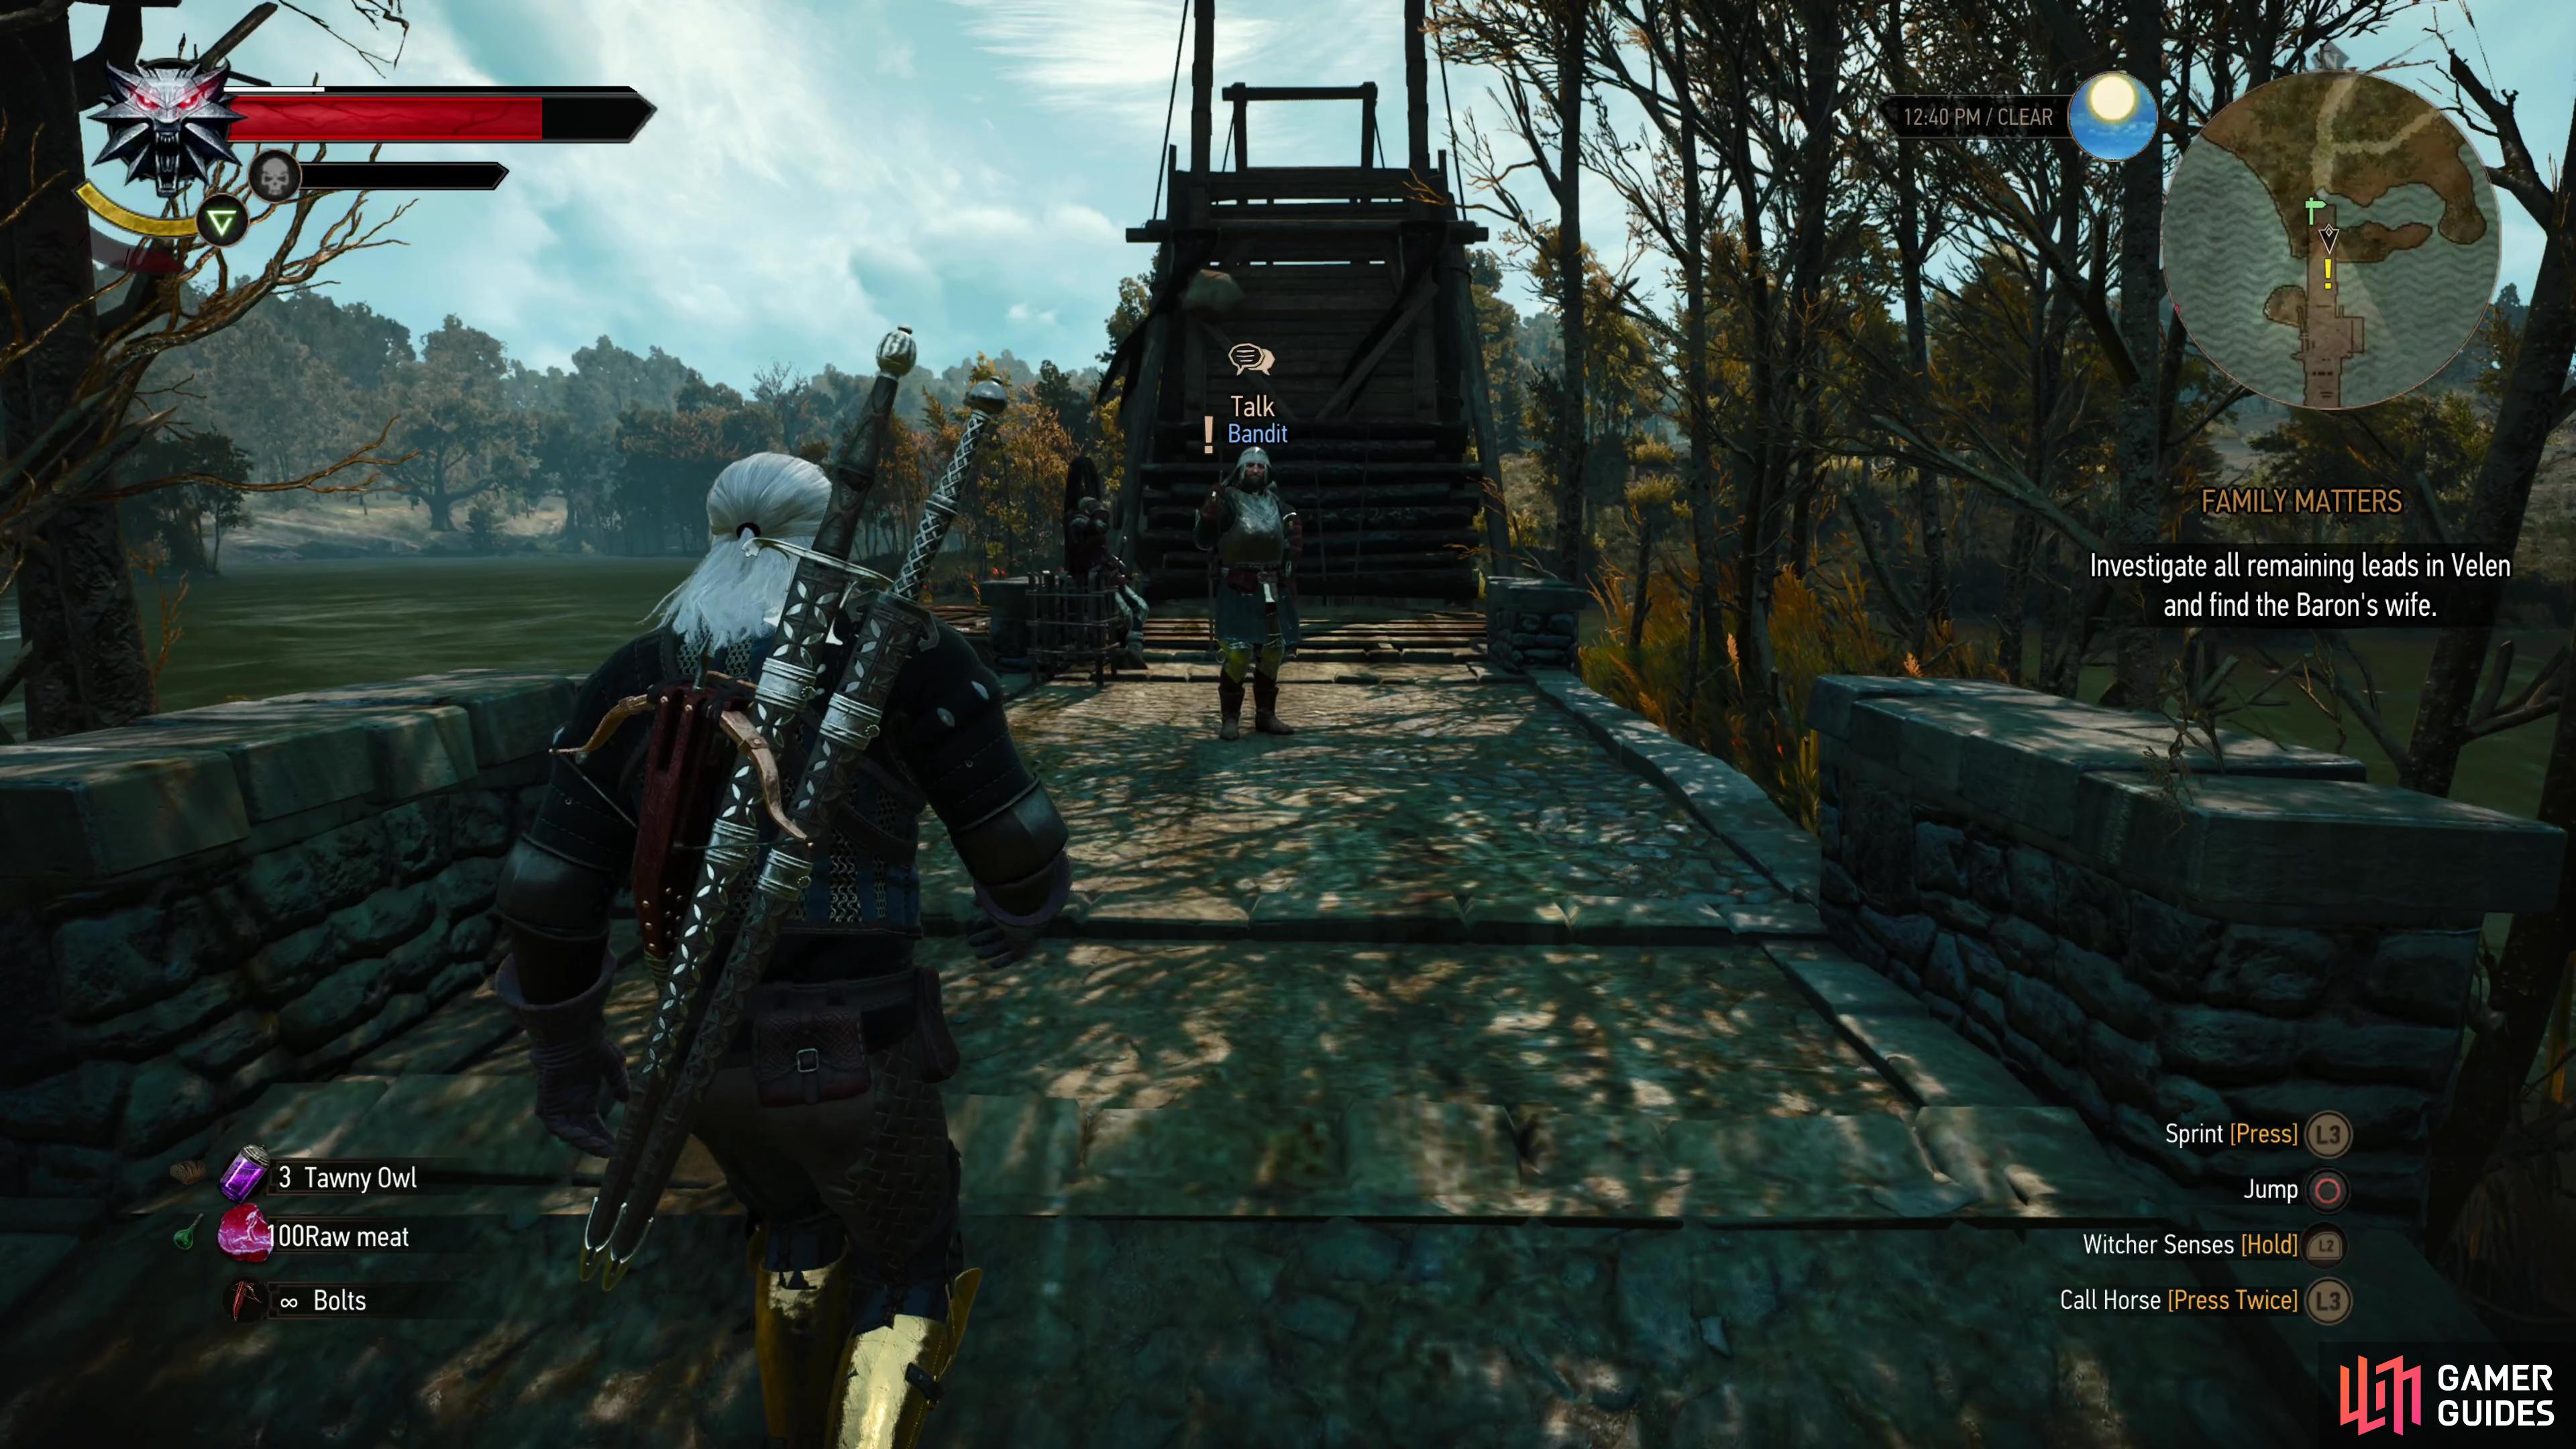 Approach Troll Bridge from the north to encounter some Bandits.